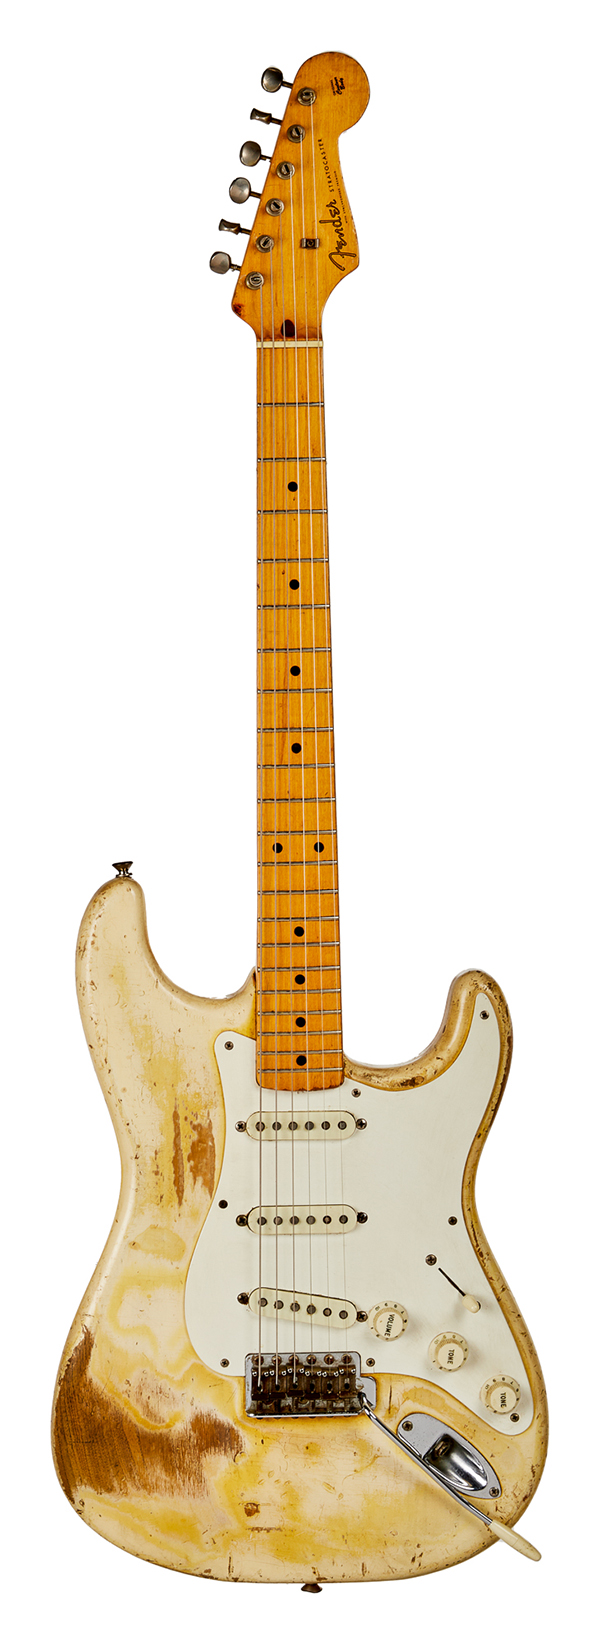 vintage 1959 Olympic white Fender Stratocaster electric guitar, owned and used by Motley Cru¨e’s Mick Mar